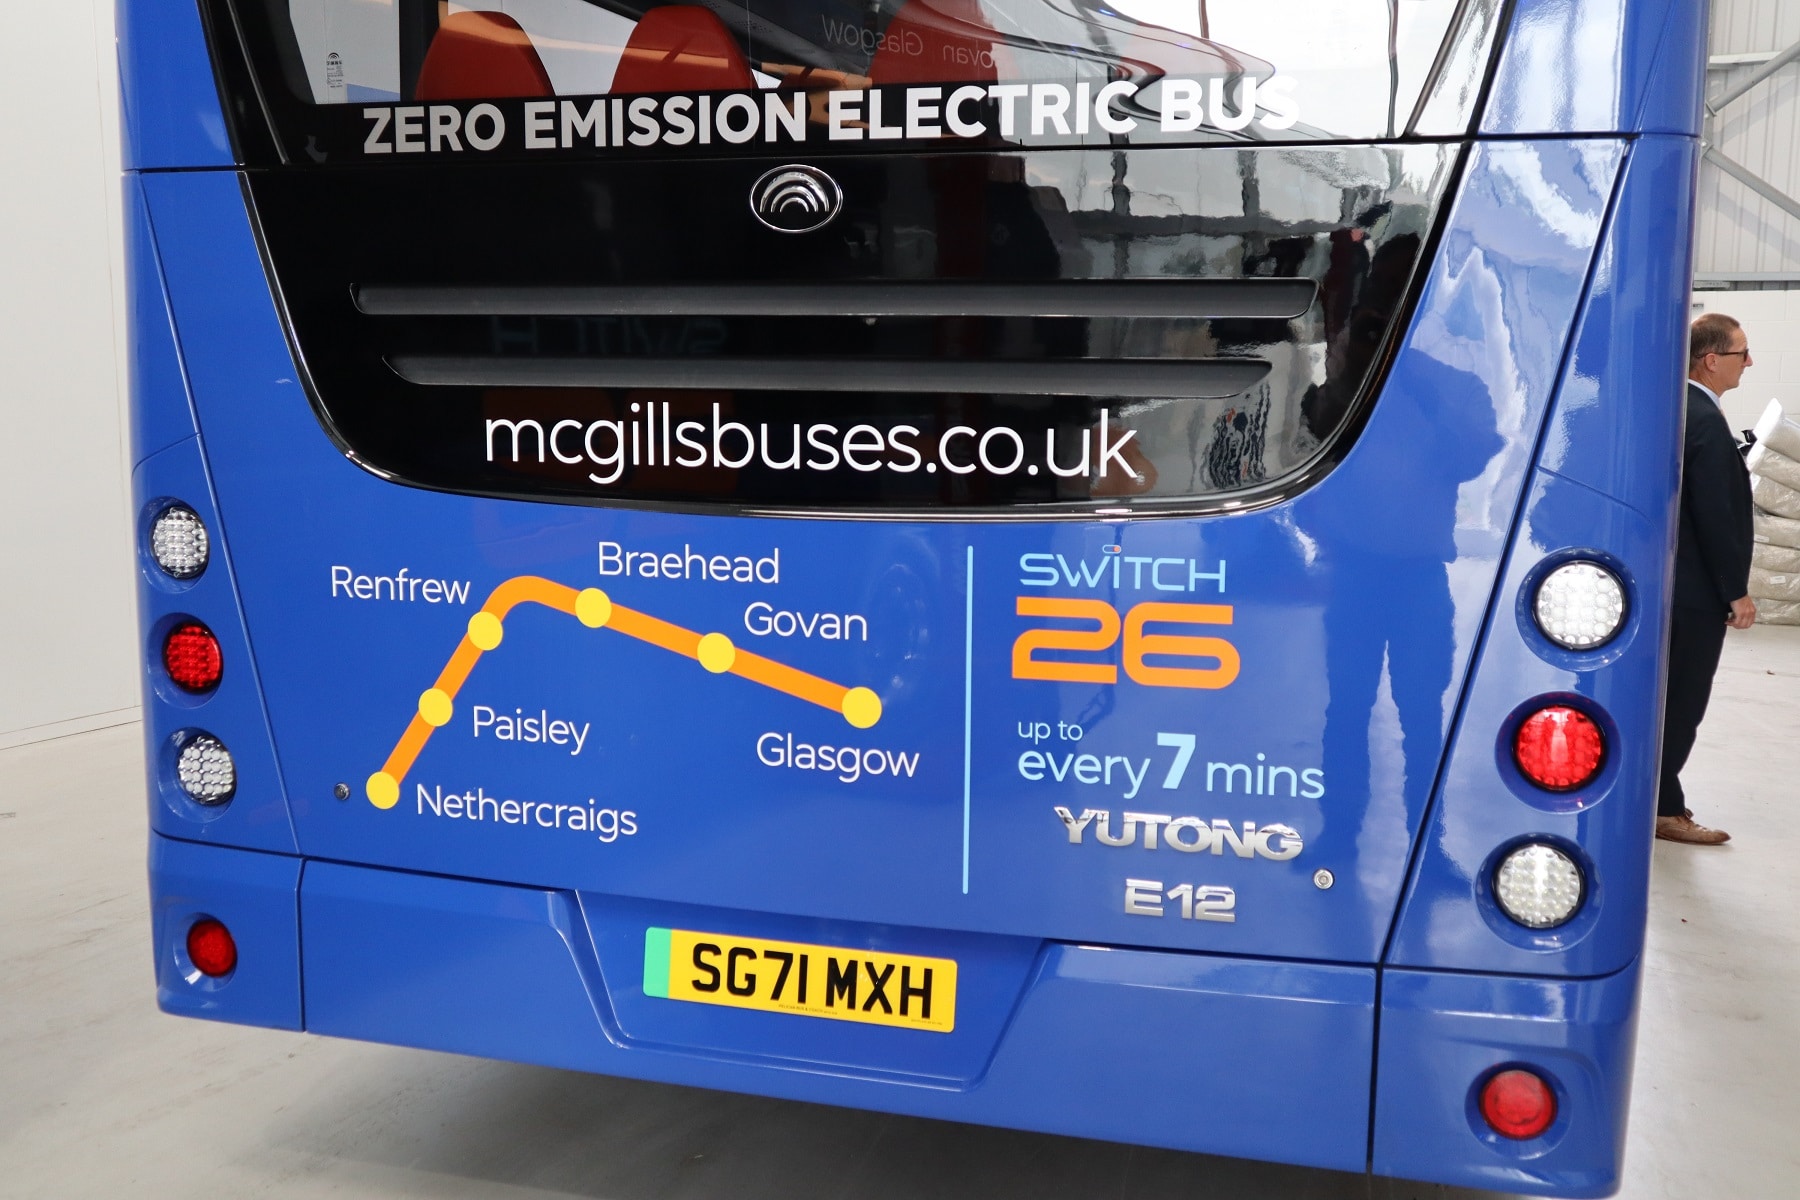 Yutong electric bus with rear route branding